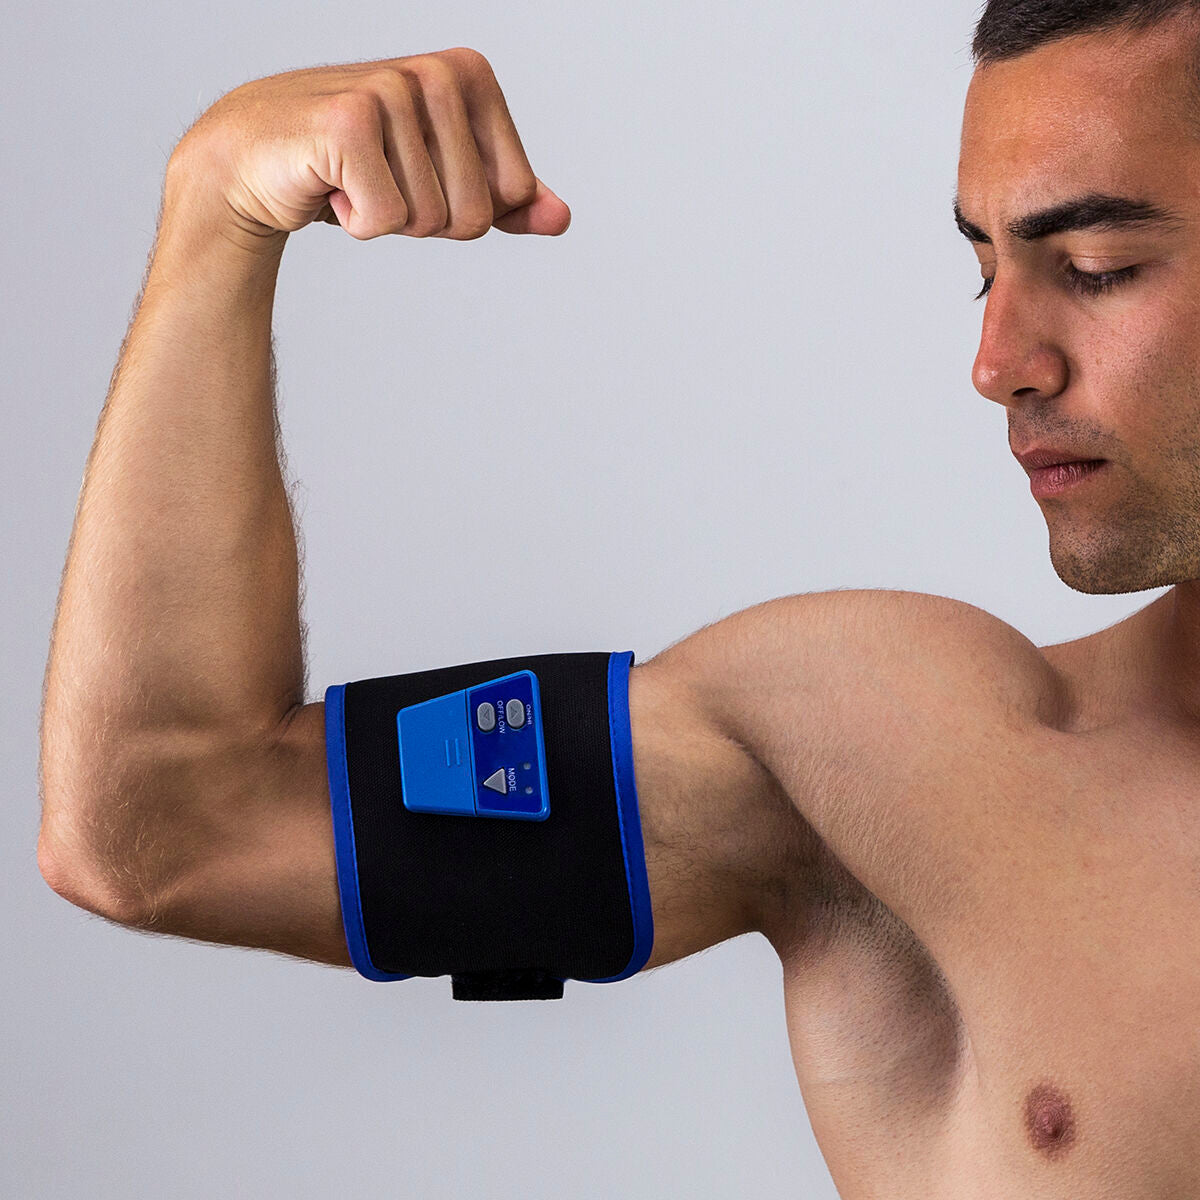 InnovaGoods Muscle Electrostimulator Tonify